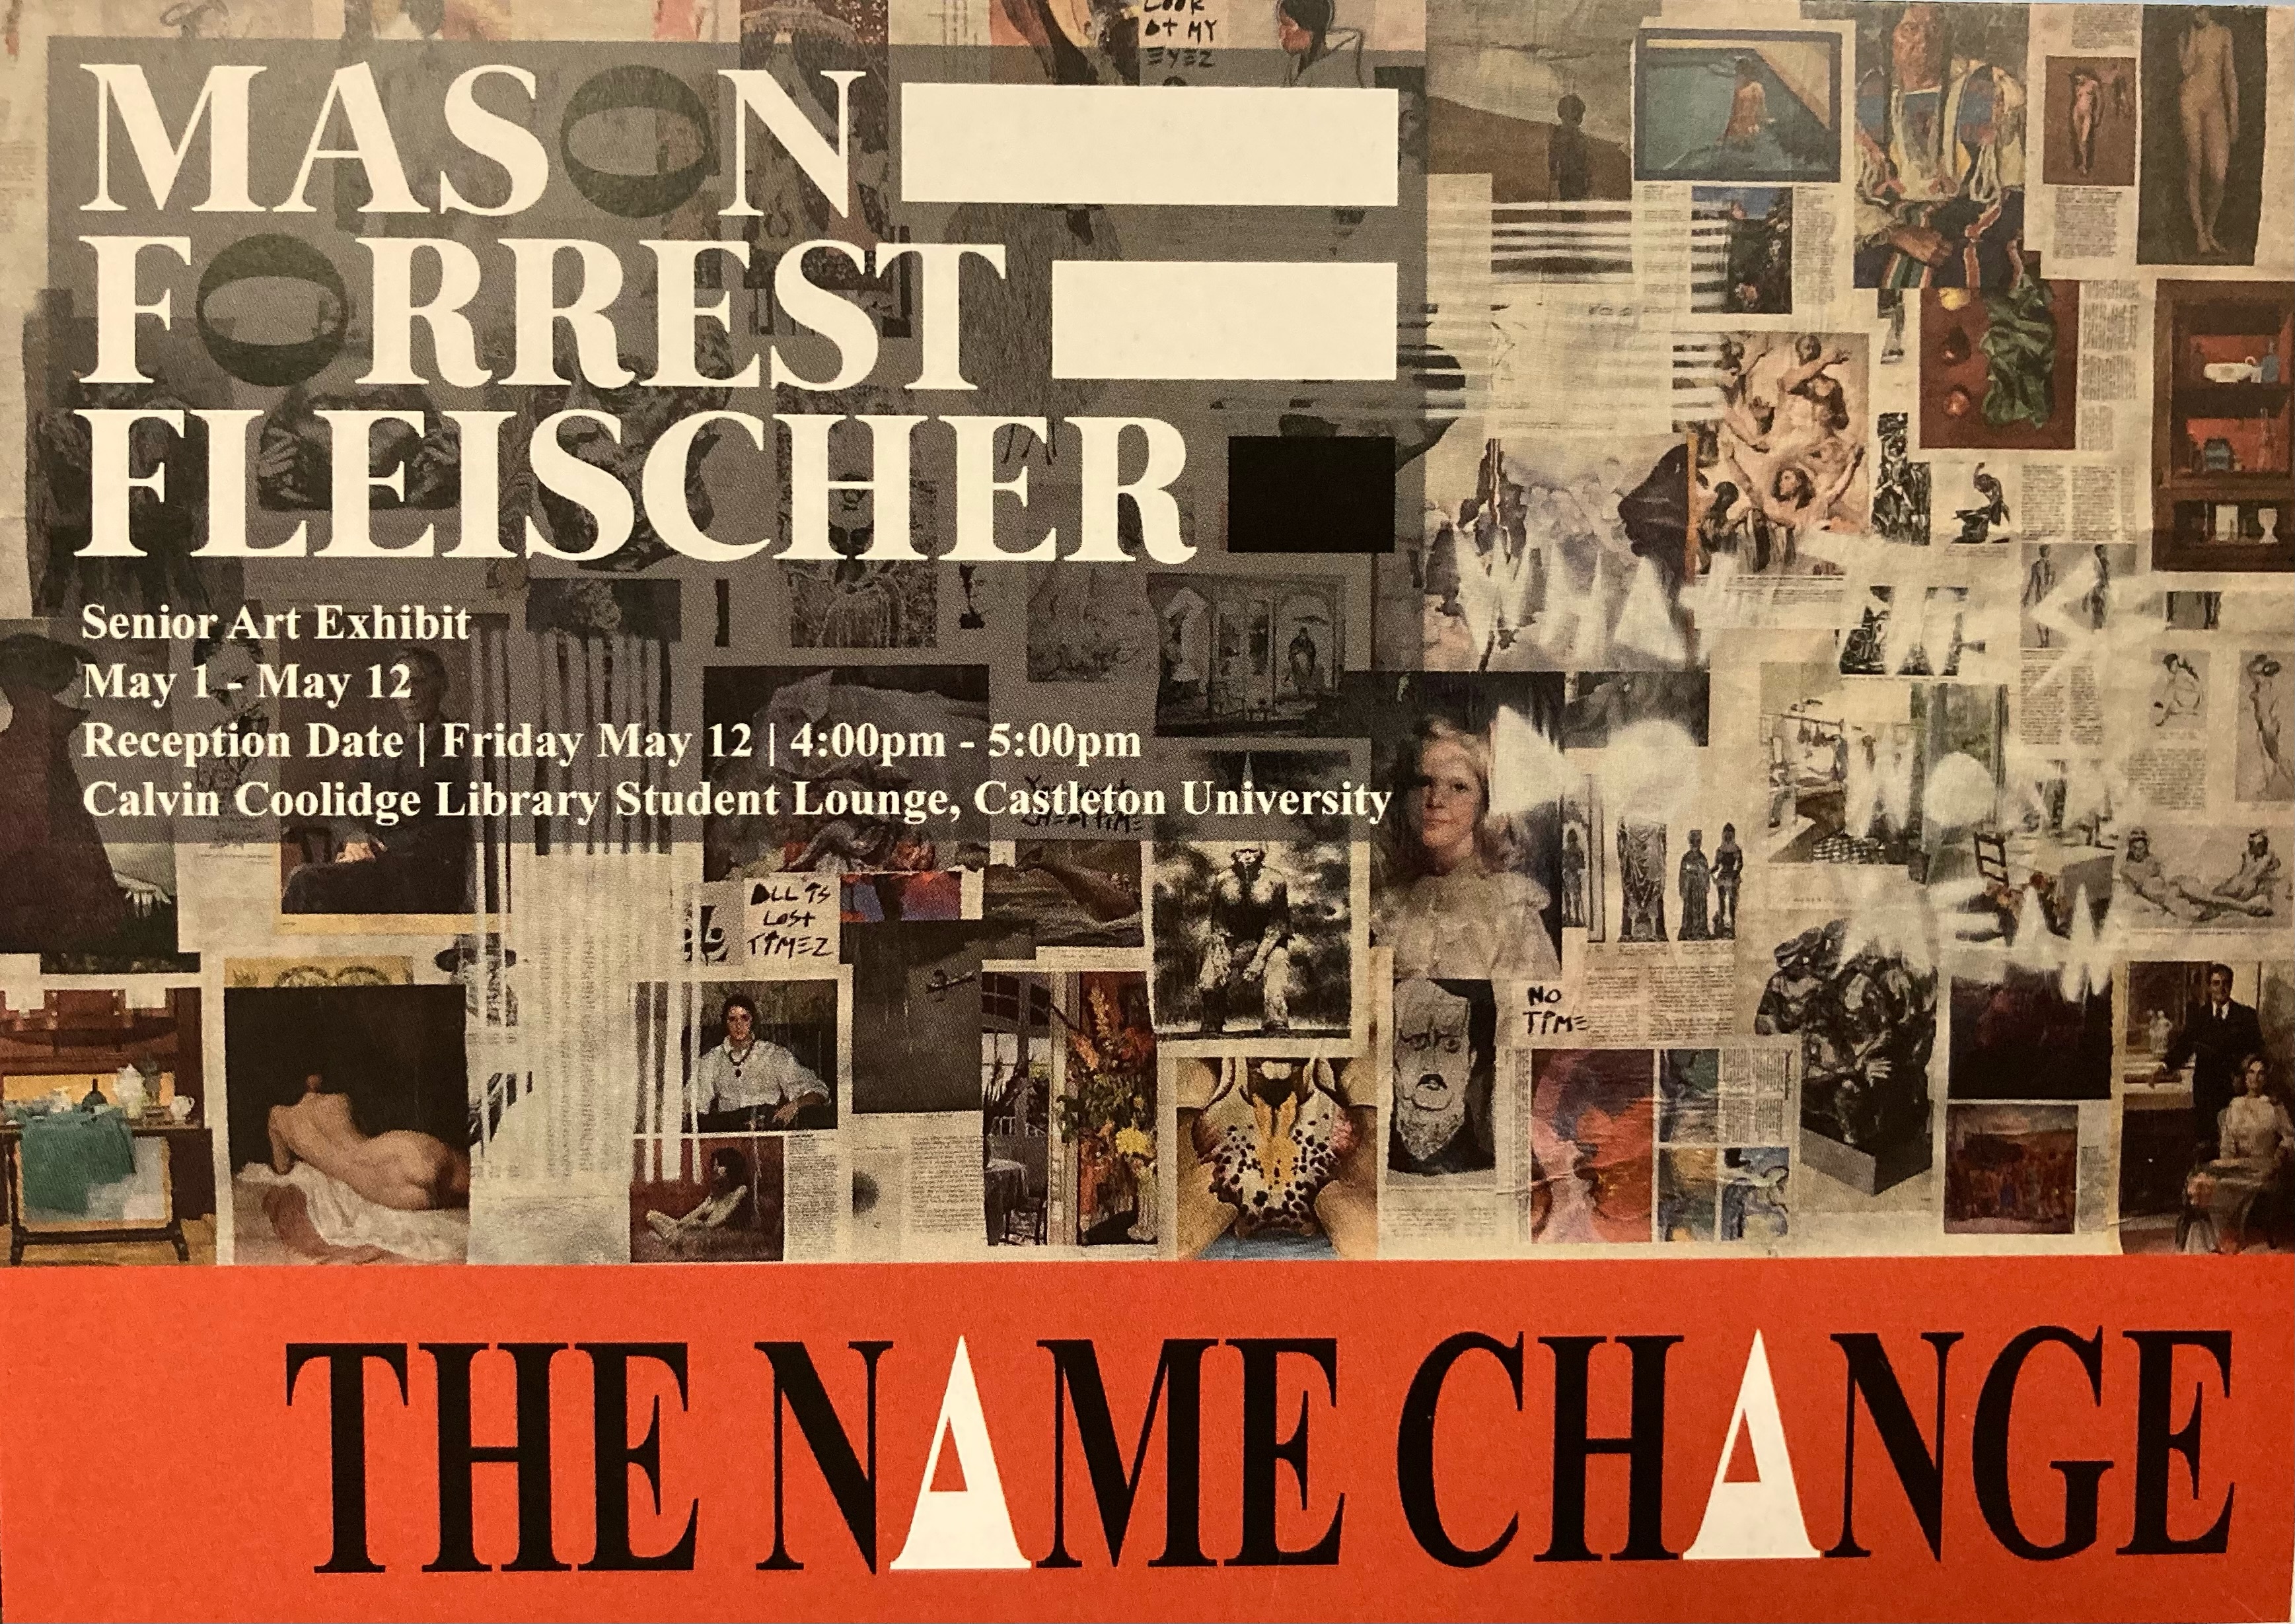 Please visit Mason Forrest Fleischer's Senior Art Exhibition "The Name Change" in the library gallery! His exhibit is here until Friday, May 12th and it's not something you'll want to miss! There will also be an Artist Reception Friday, May 12th at 4pm.